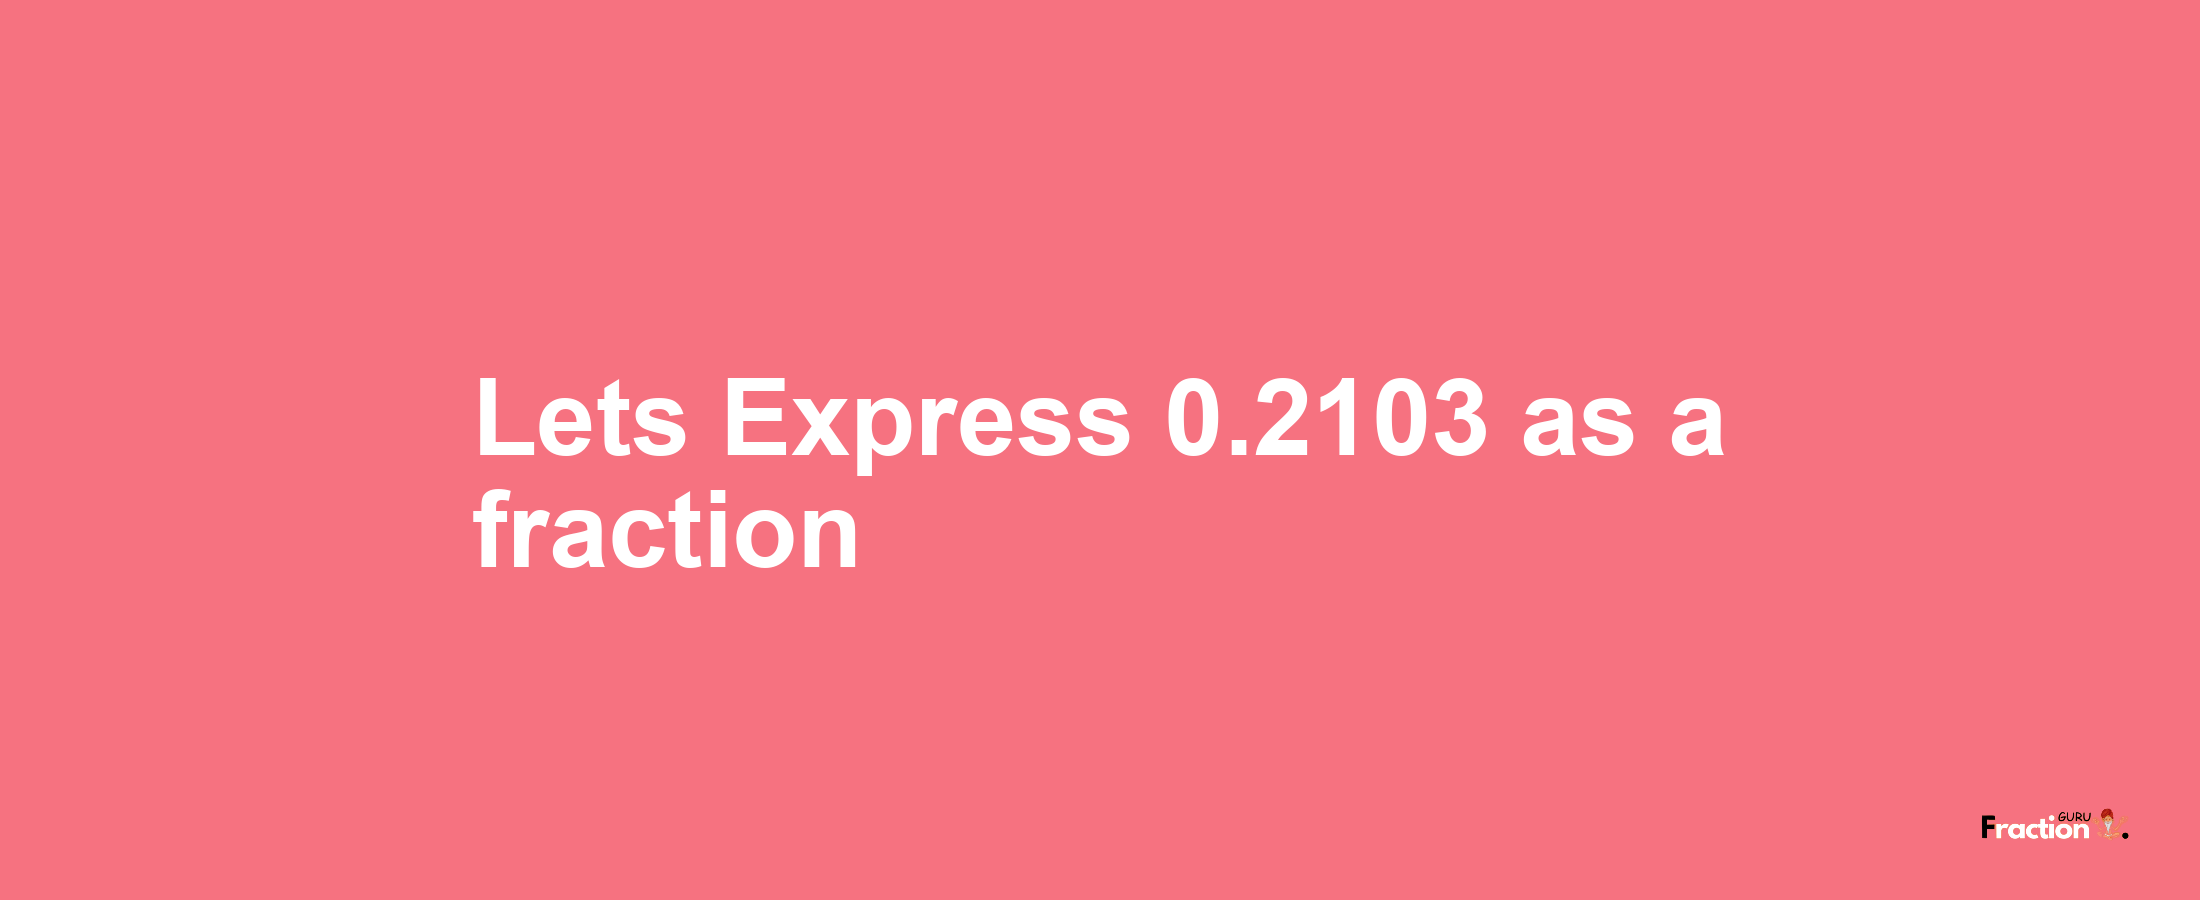 Lets Express 0.2103 as afraction